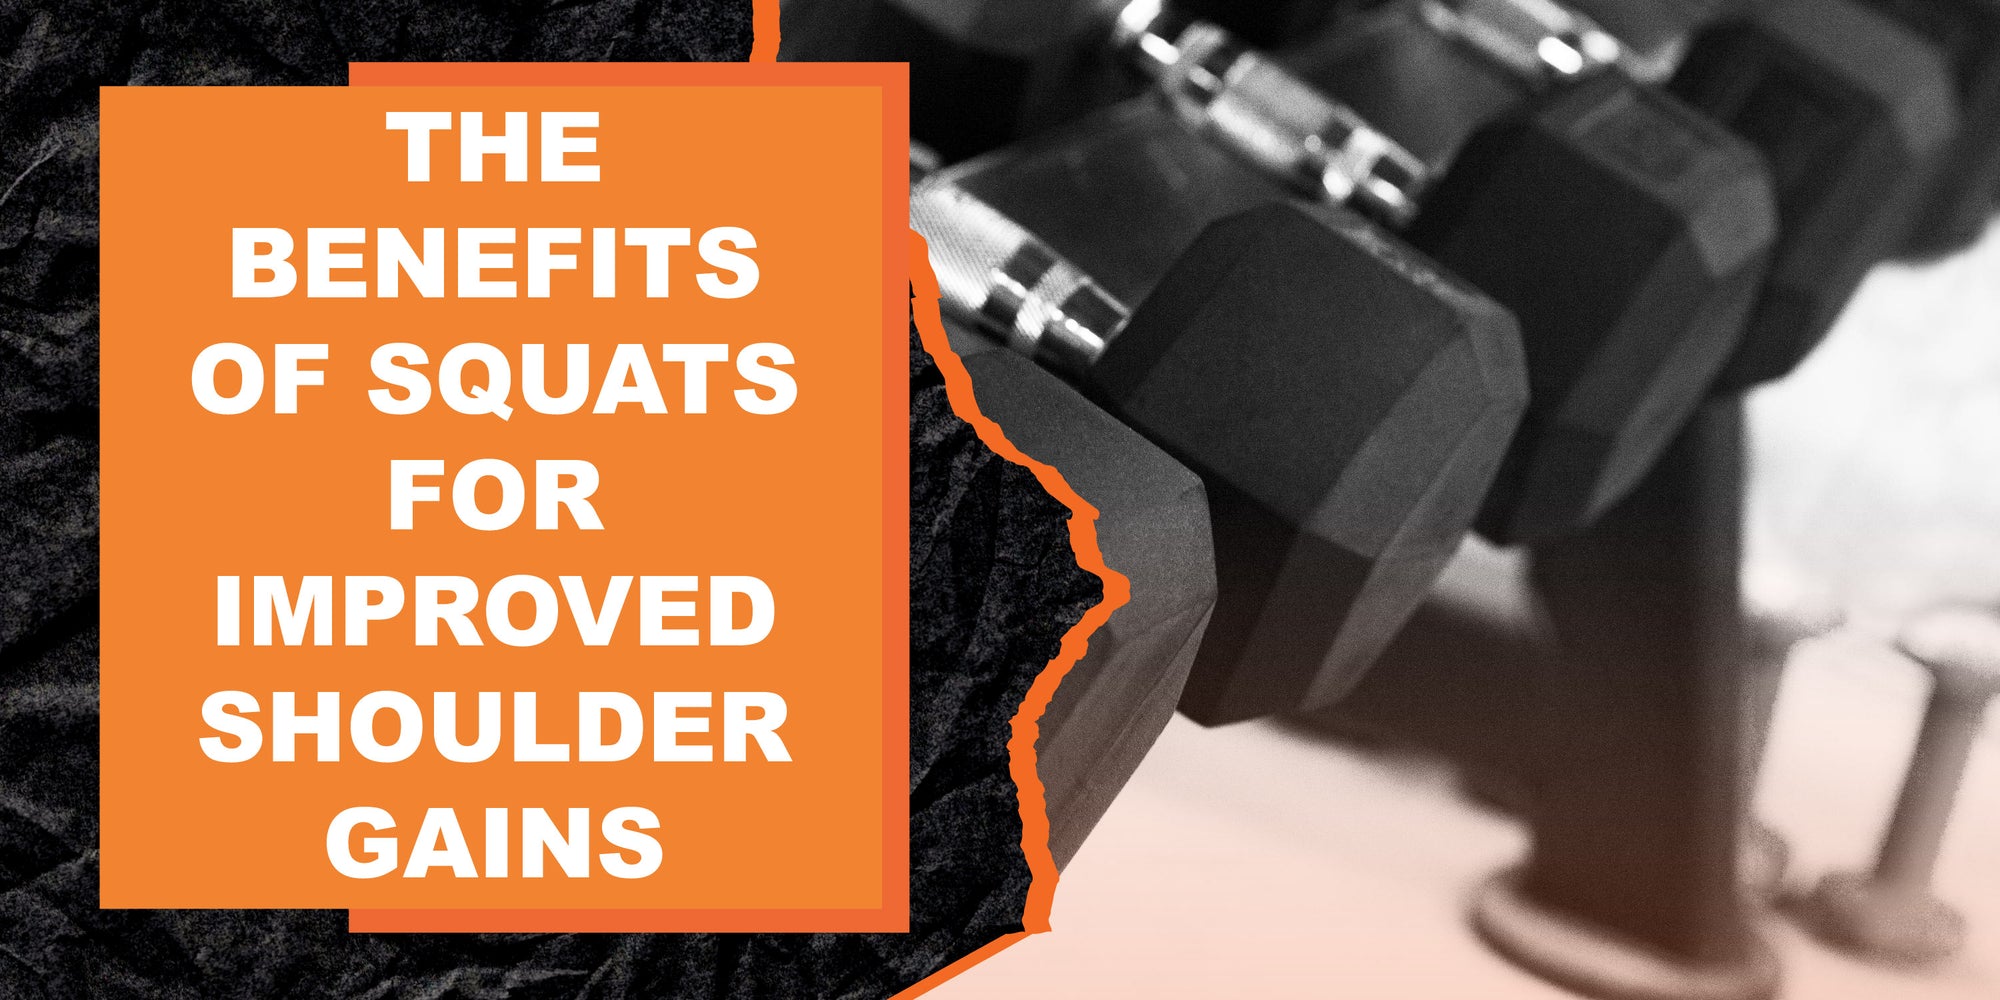 The Benefits of Squats for Improved Shoulder Gains